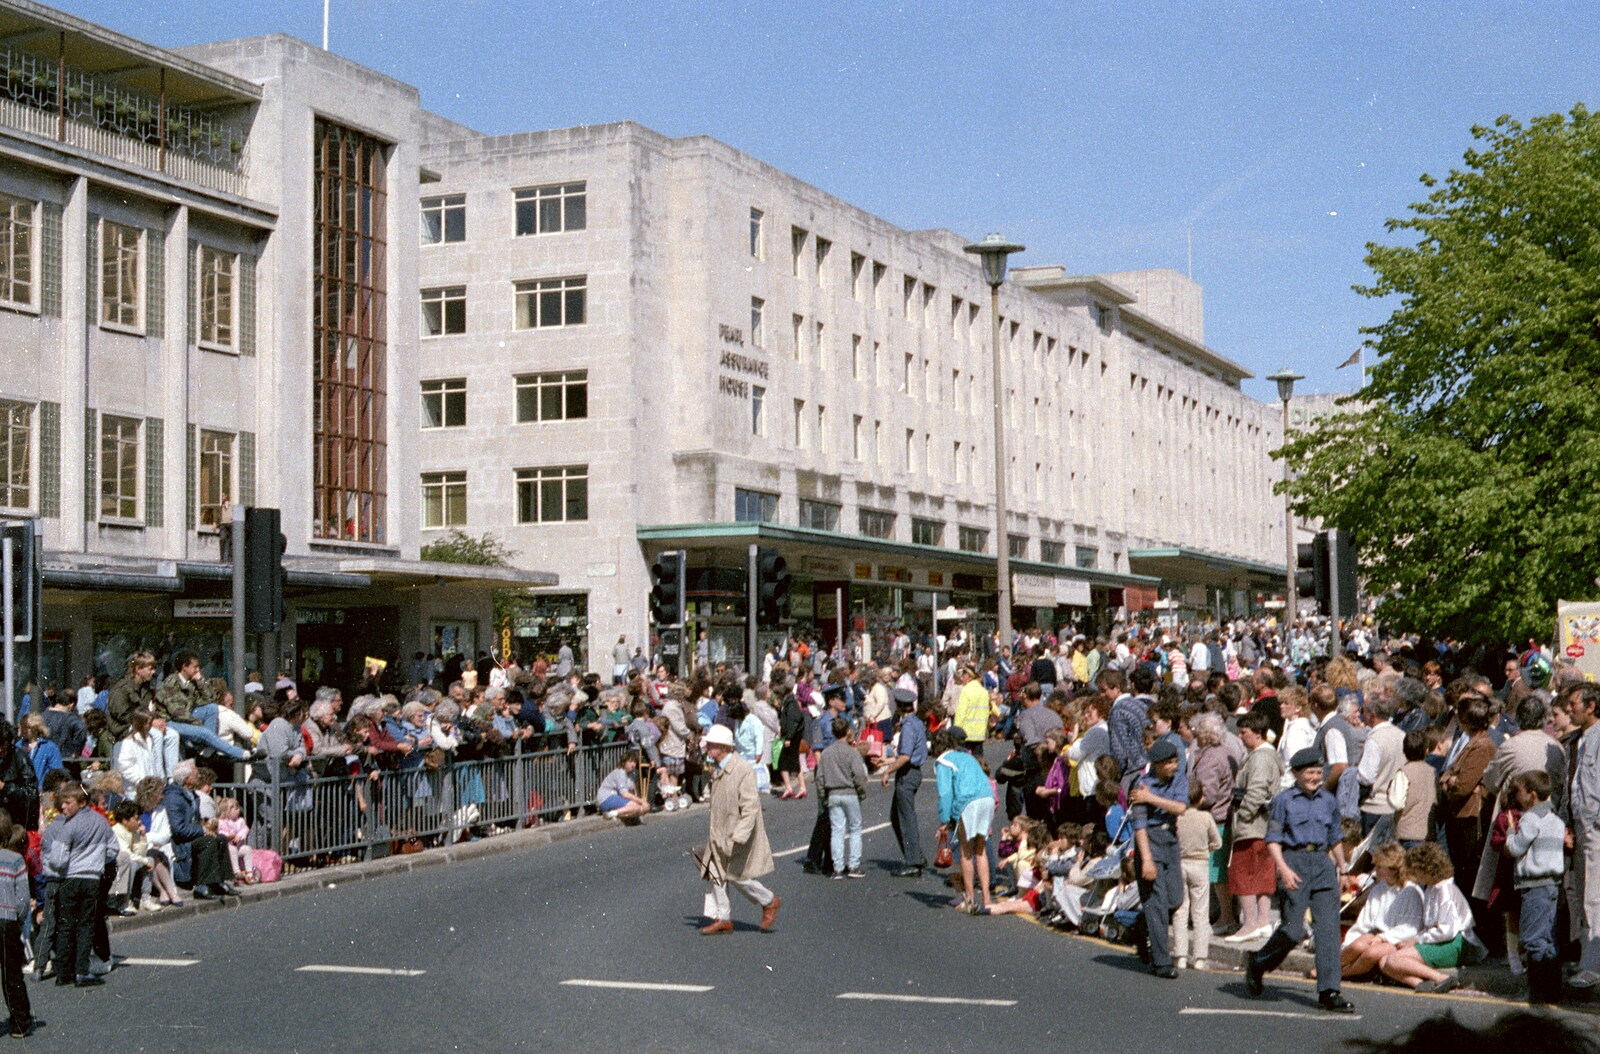 The crowds mill around by the end of Royal Parade from Uni: The Lord Mayor's Procession, Plymouth, Devon - 21st May 1986